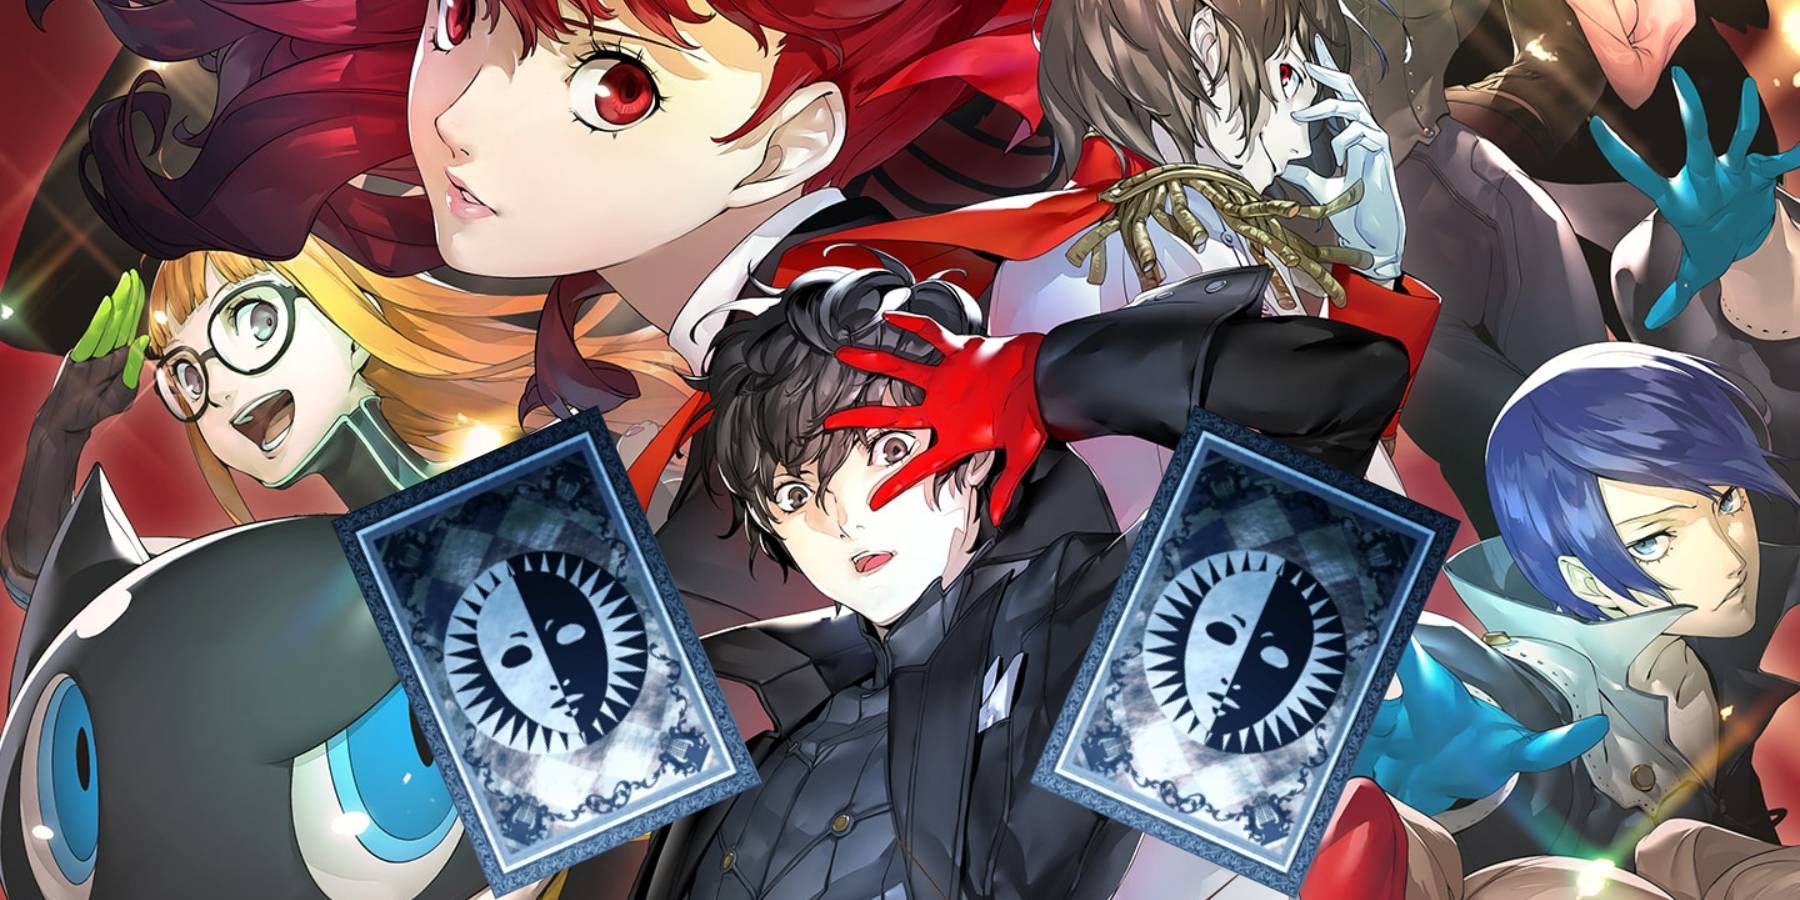 Persona 5 Royal art with Joker looking at Arcana Cards from Persona 3